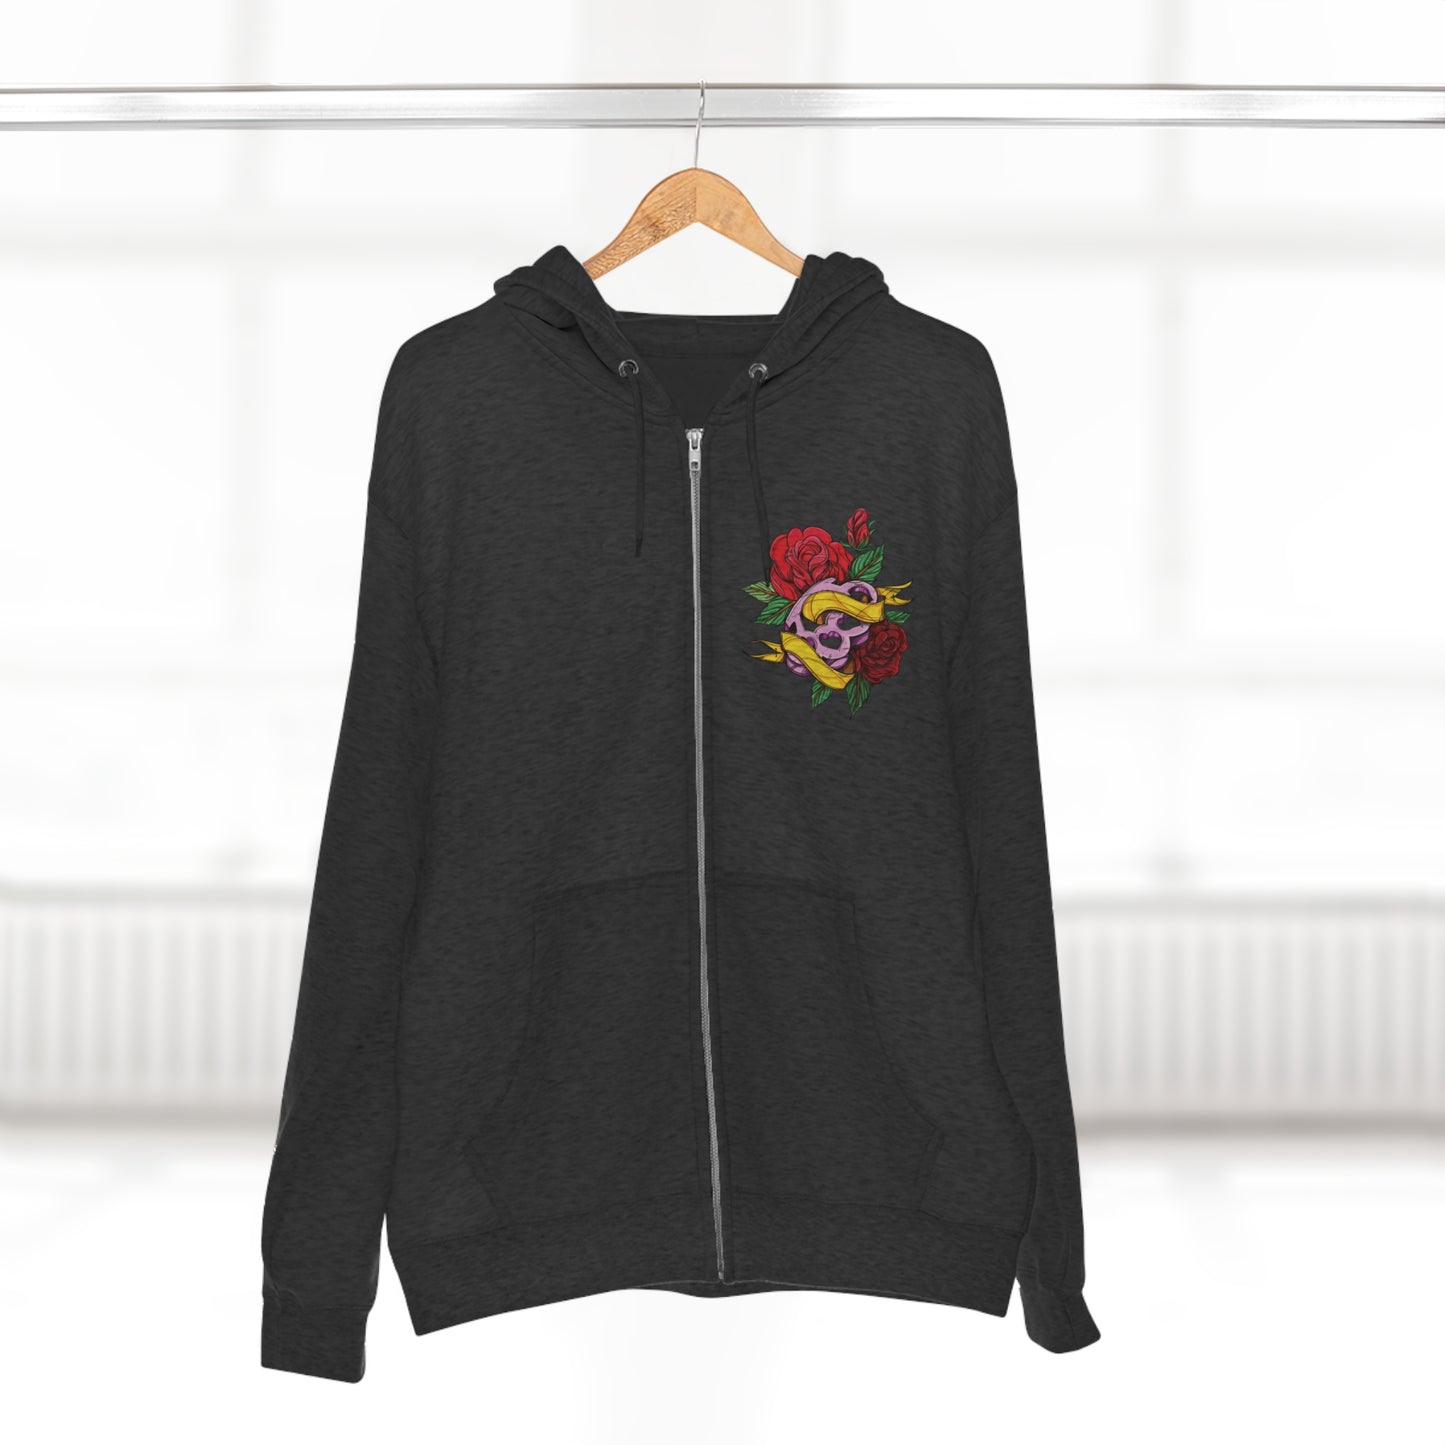 She's a Fighter Full Zip Hoodie